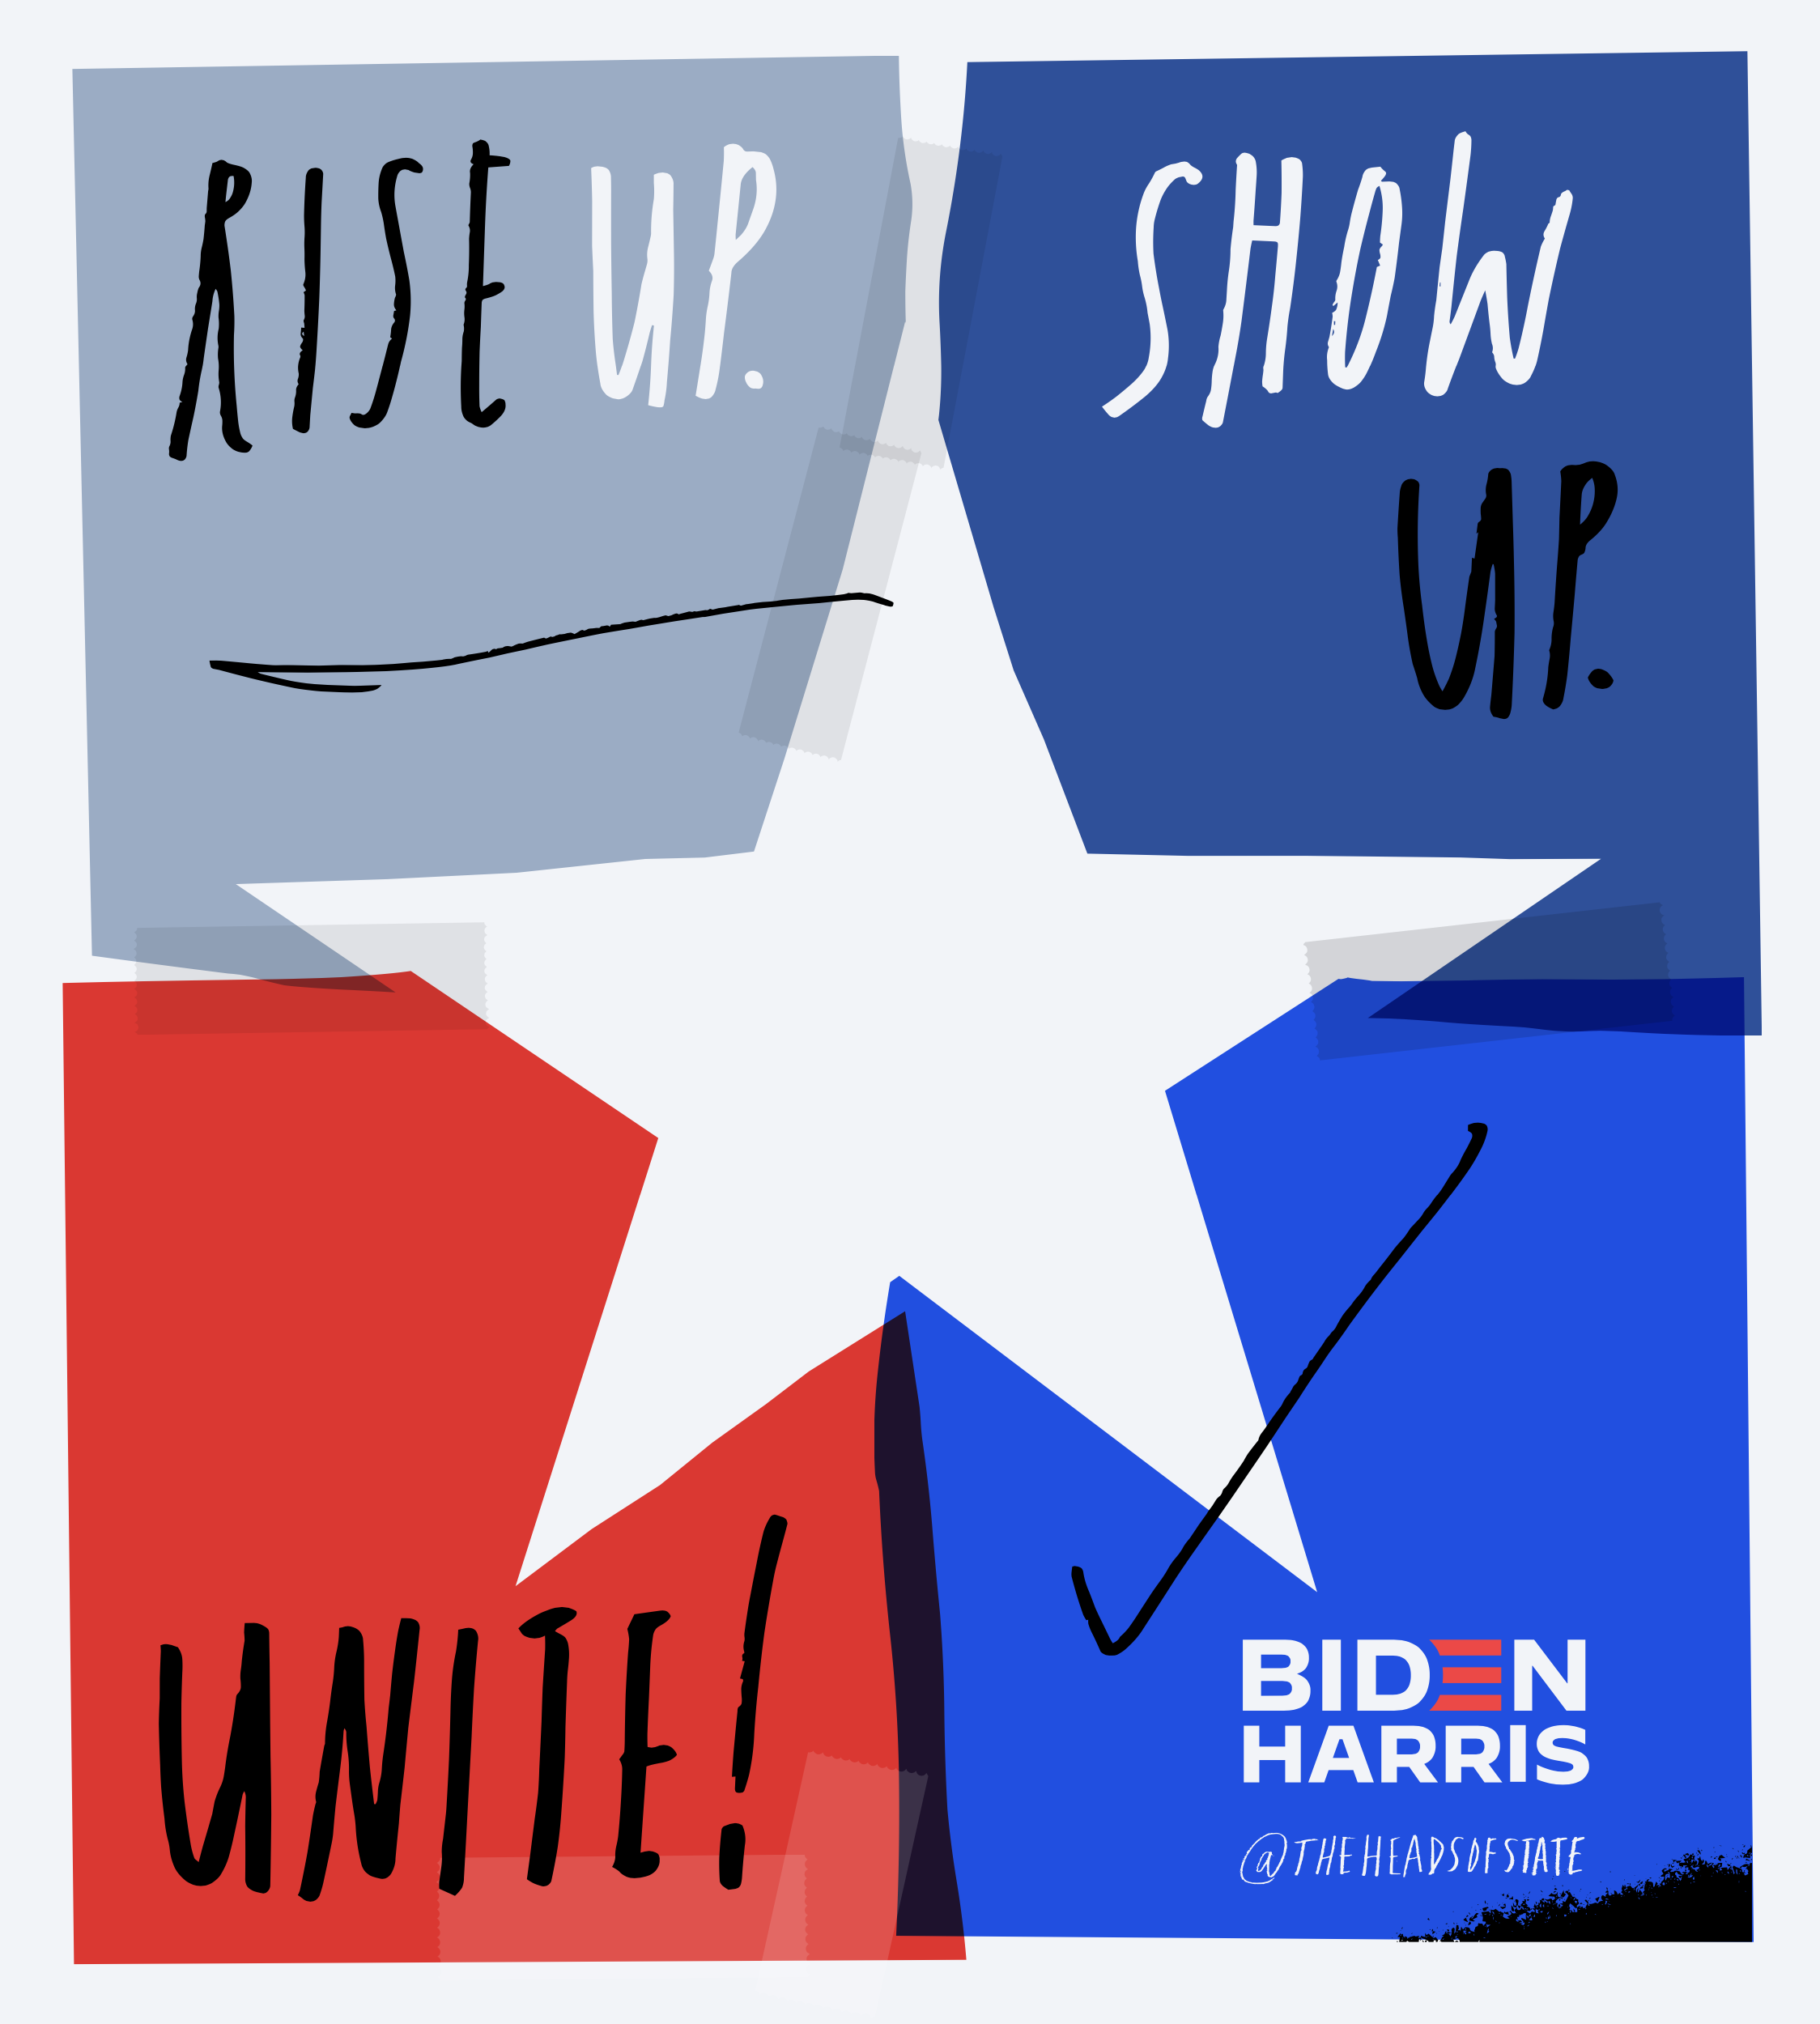 Lettering art of the phrase 'Rise up. Show up. Unite!' by The Heads of State